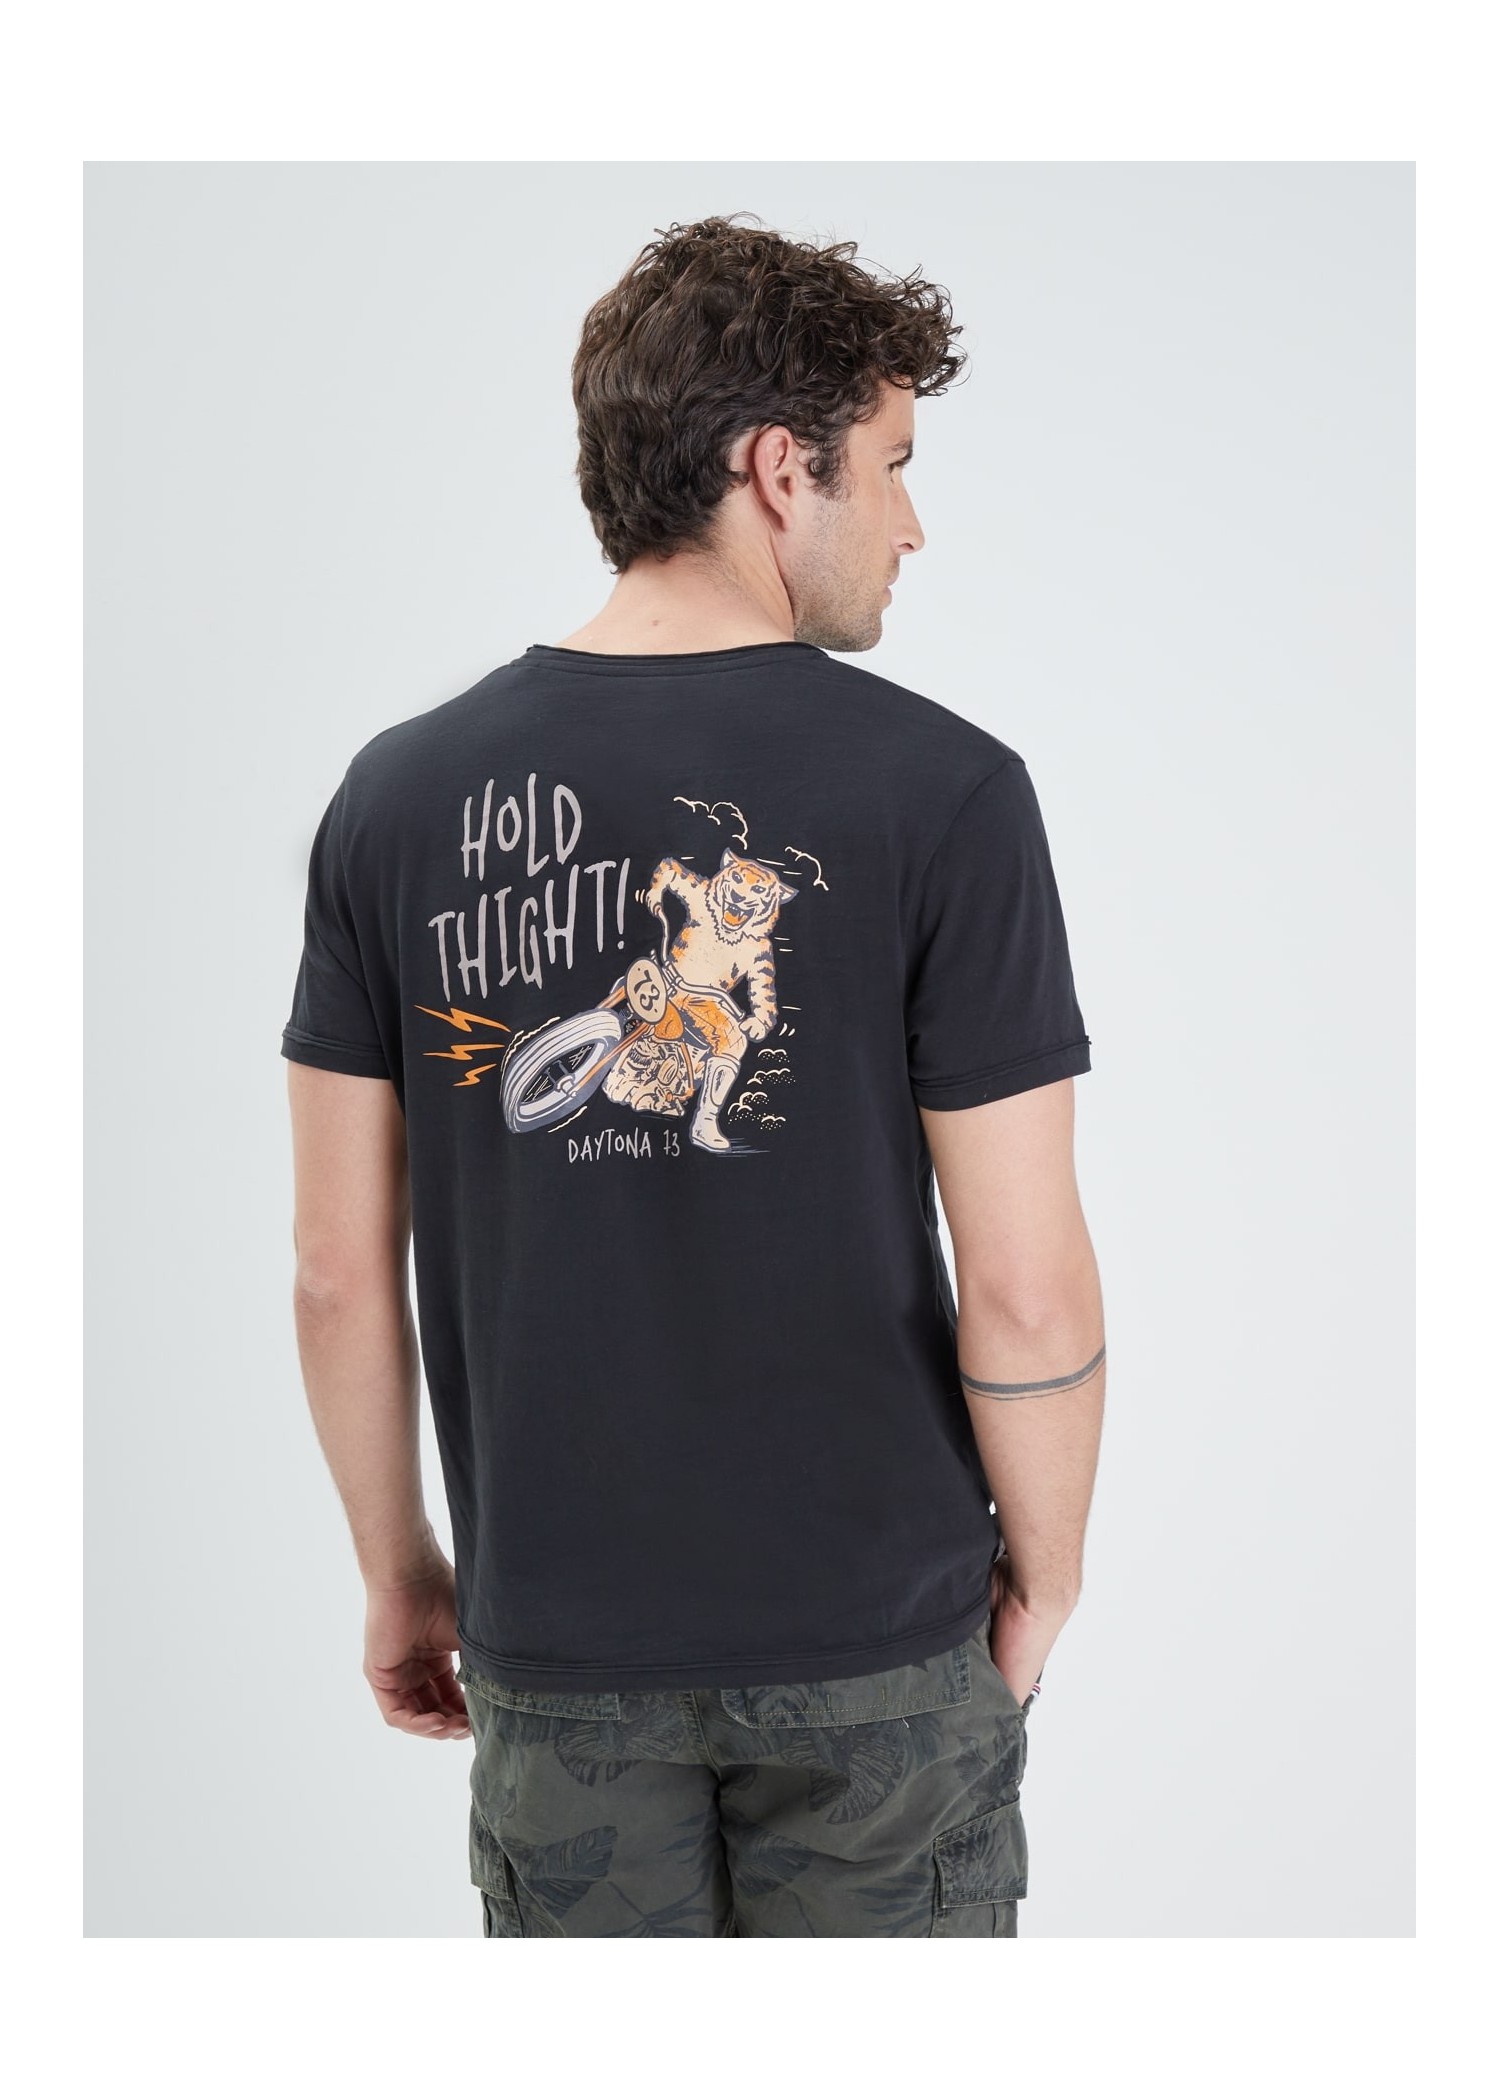 Tiger T-shirt Homme - Home